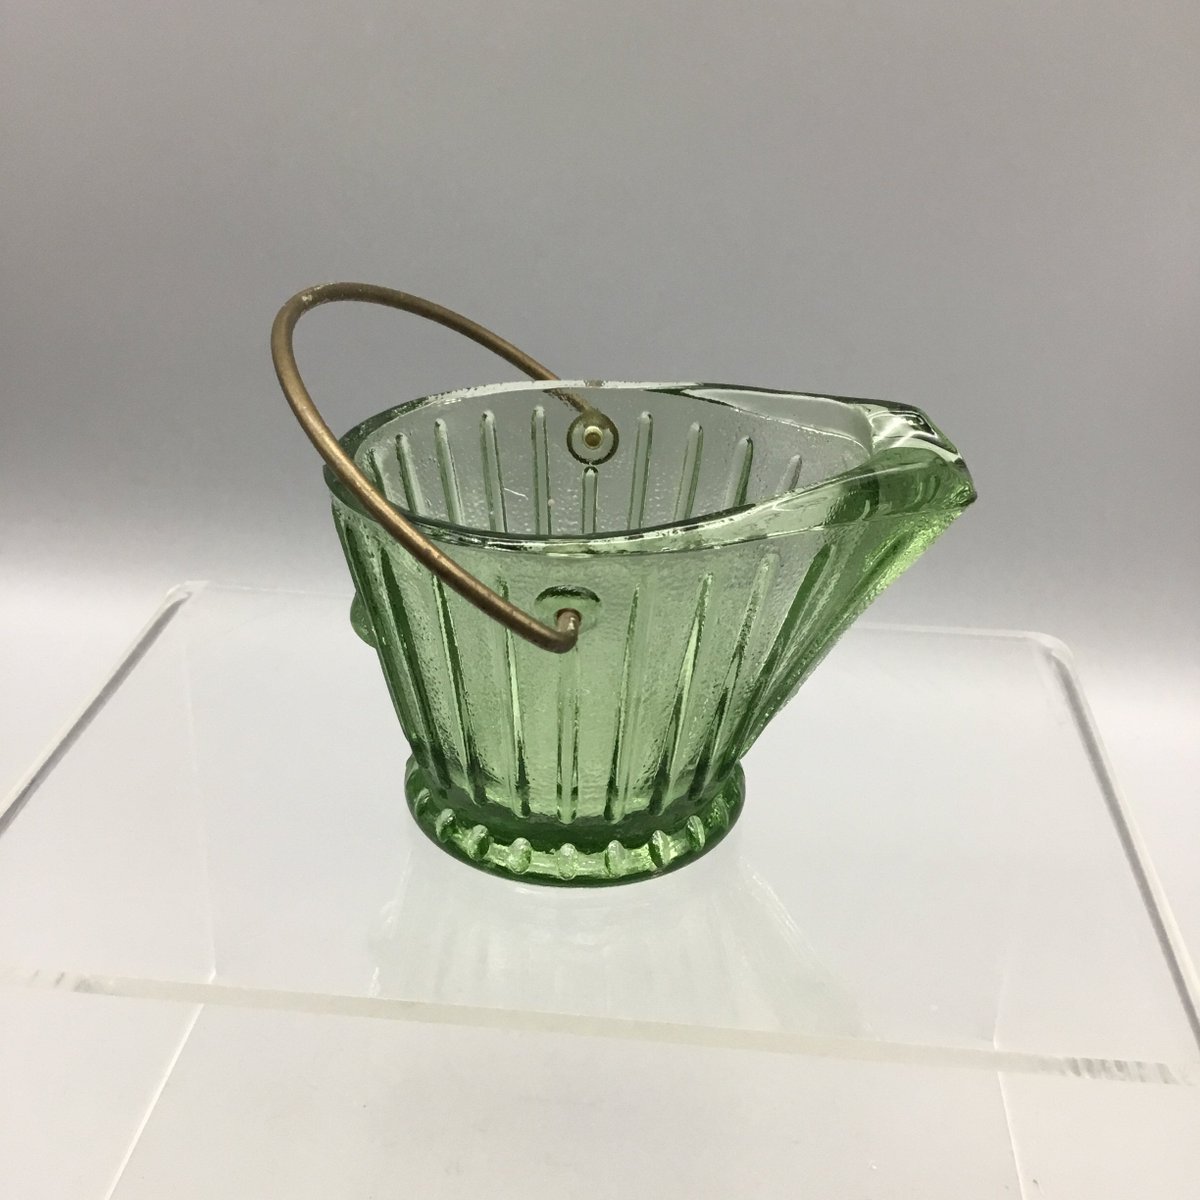 Excited to share the latest addition to my #etsy shop: Federal Pressed Green Glass Coal Bucket Scuttle Ashtray etsy.me/3x7Tr4s #green #federalglass #pressedglass #coalbucket #scuttle #ashtray #trinket #display #curio